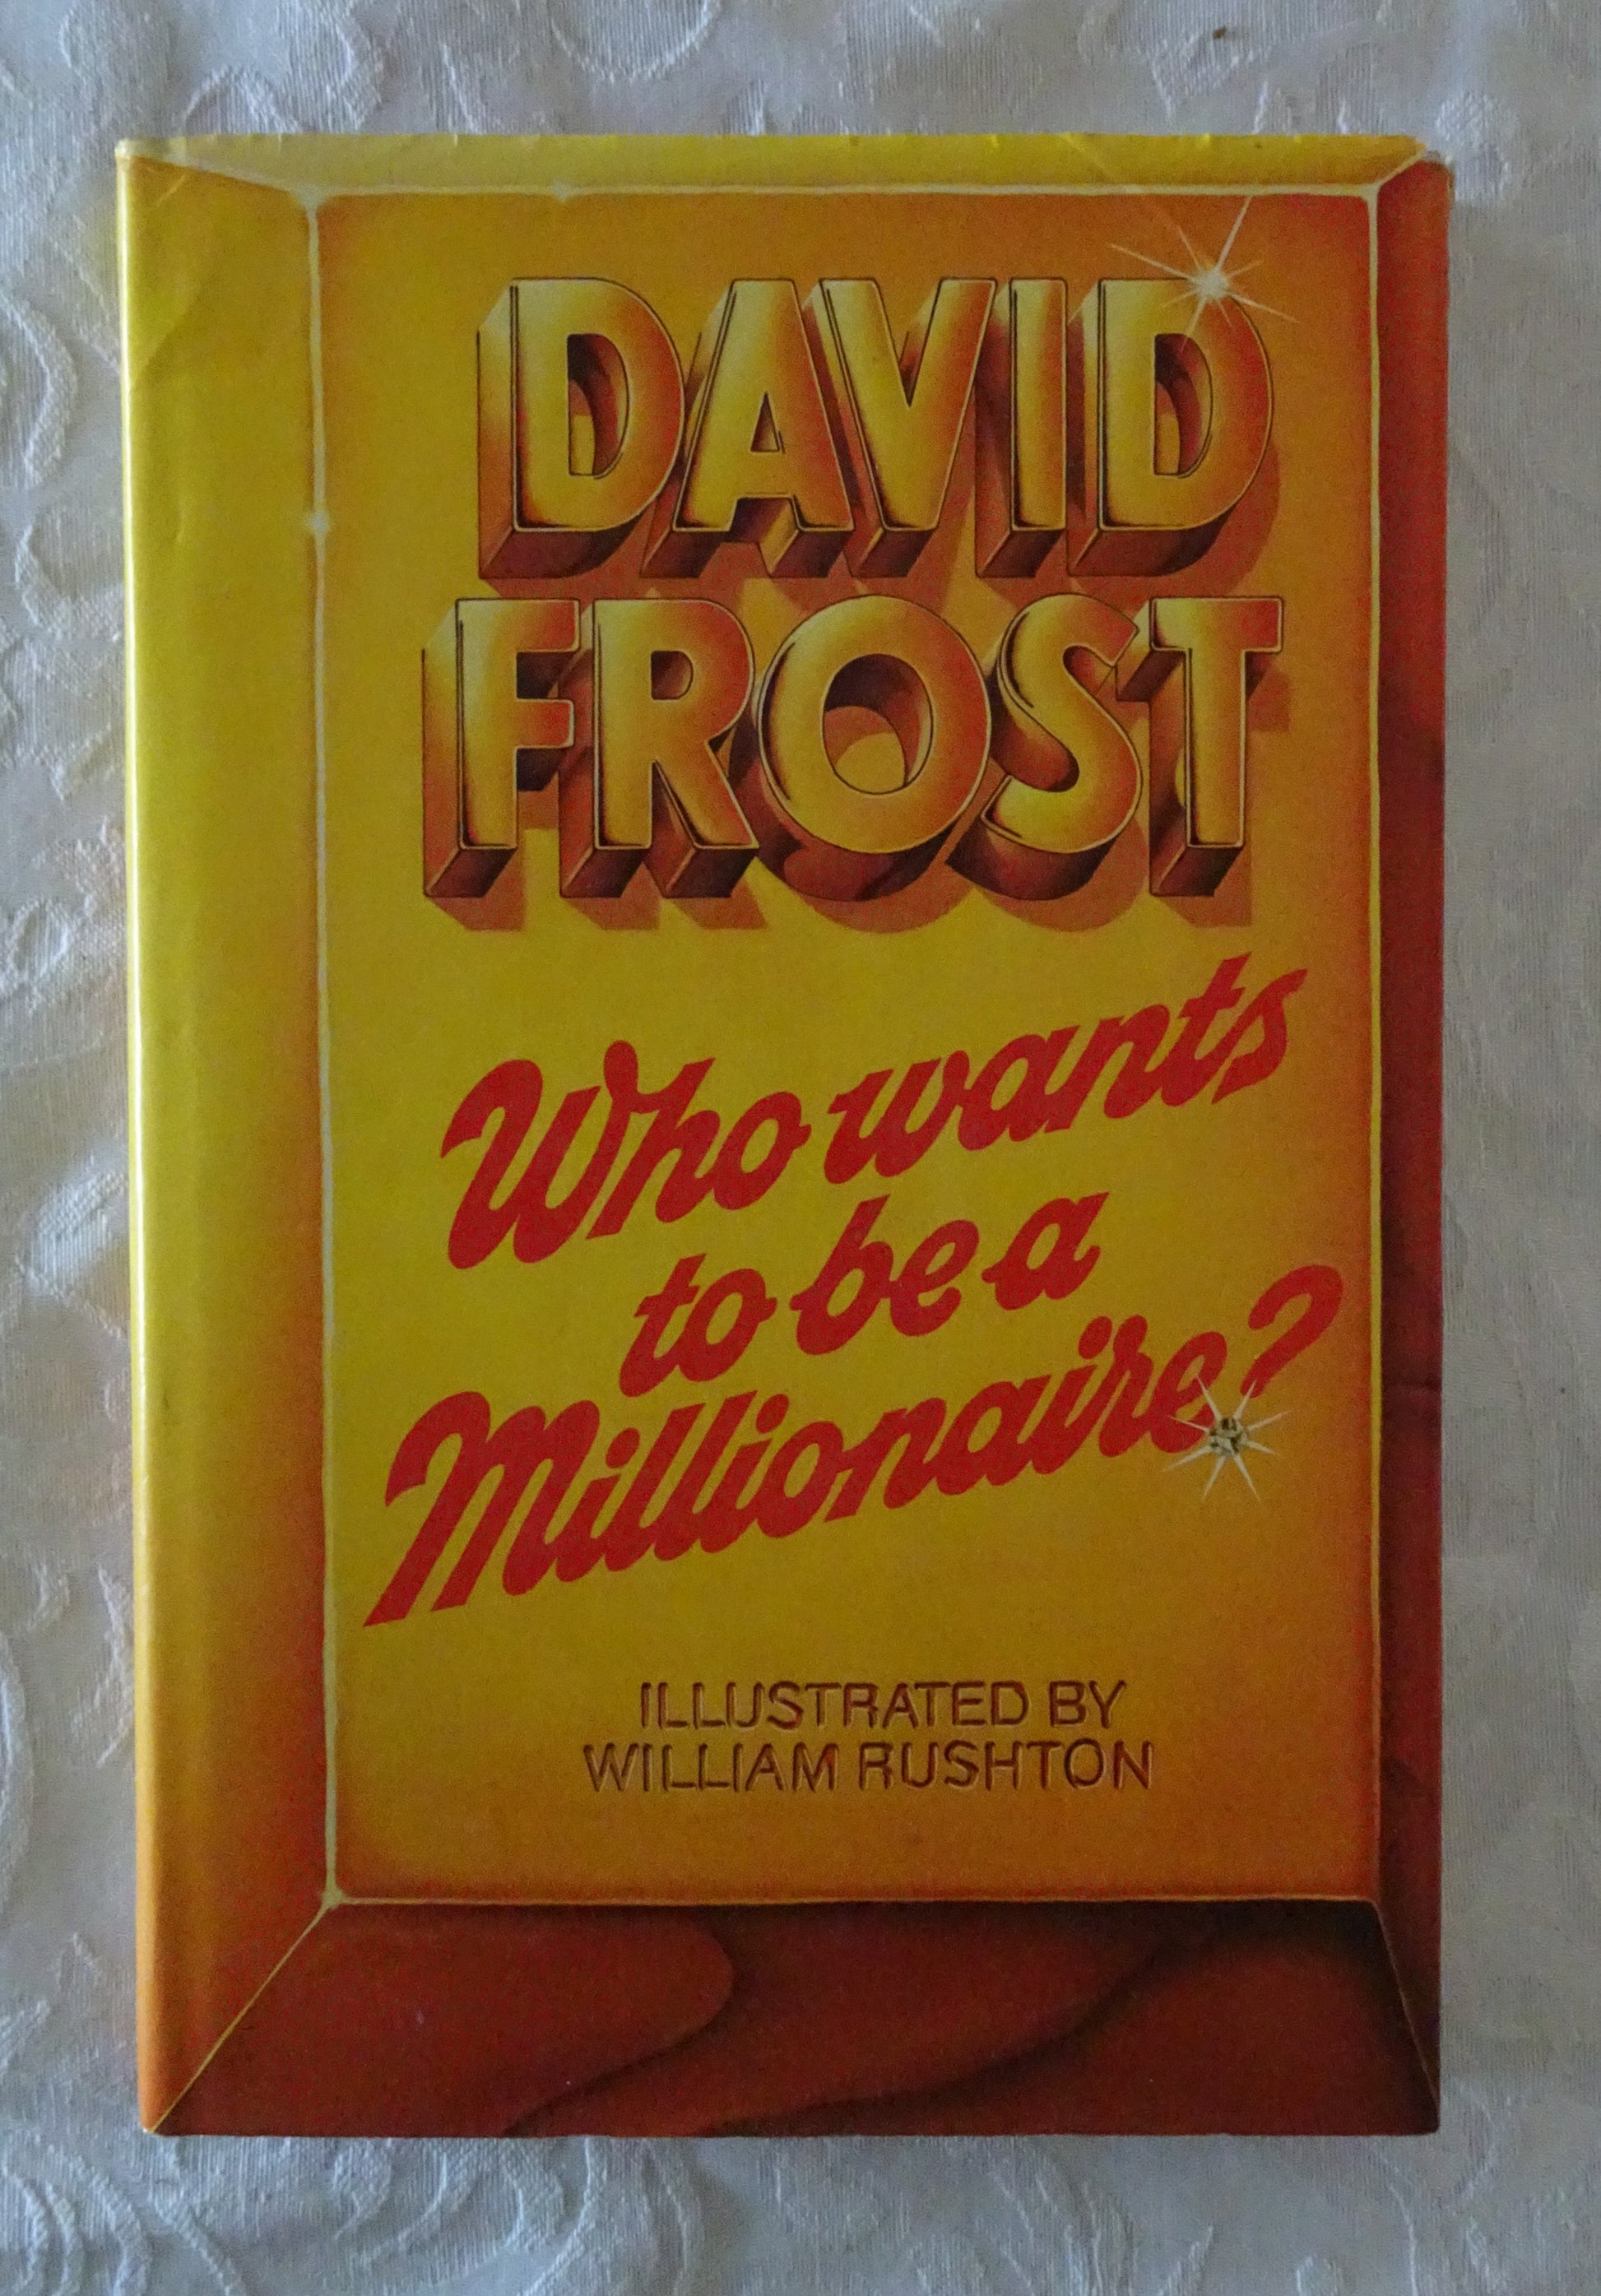 Who Wants To Be A Millionaire?  Compiled and Written by David Frost and Michael Deakin,  Illustrated by William Rushton